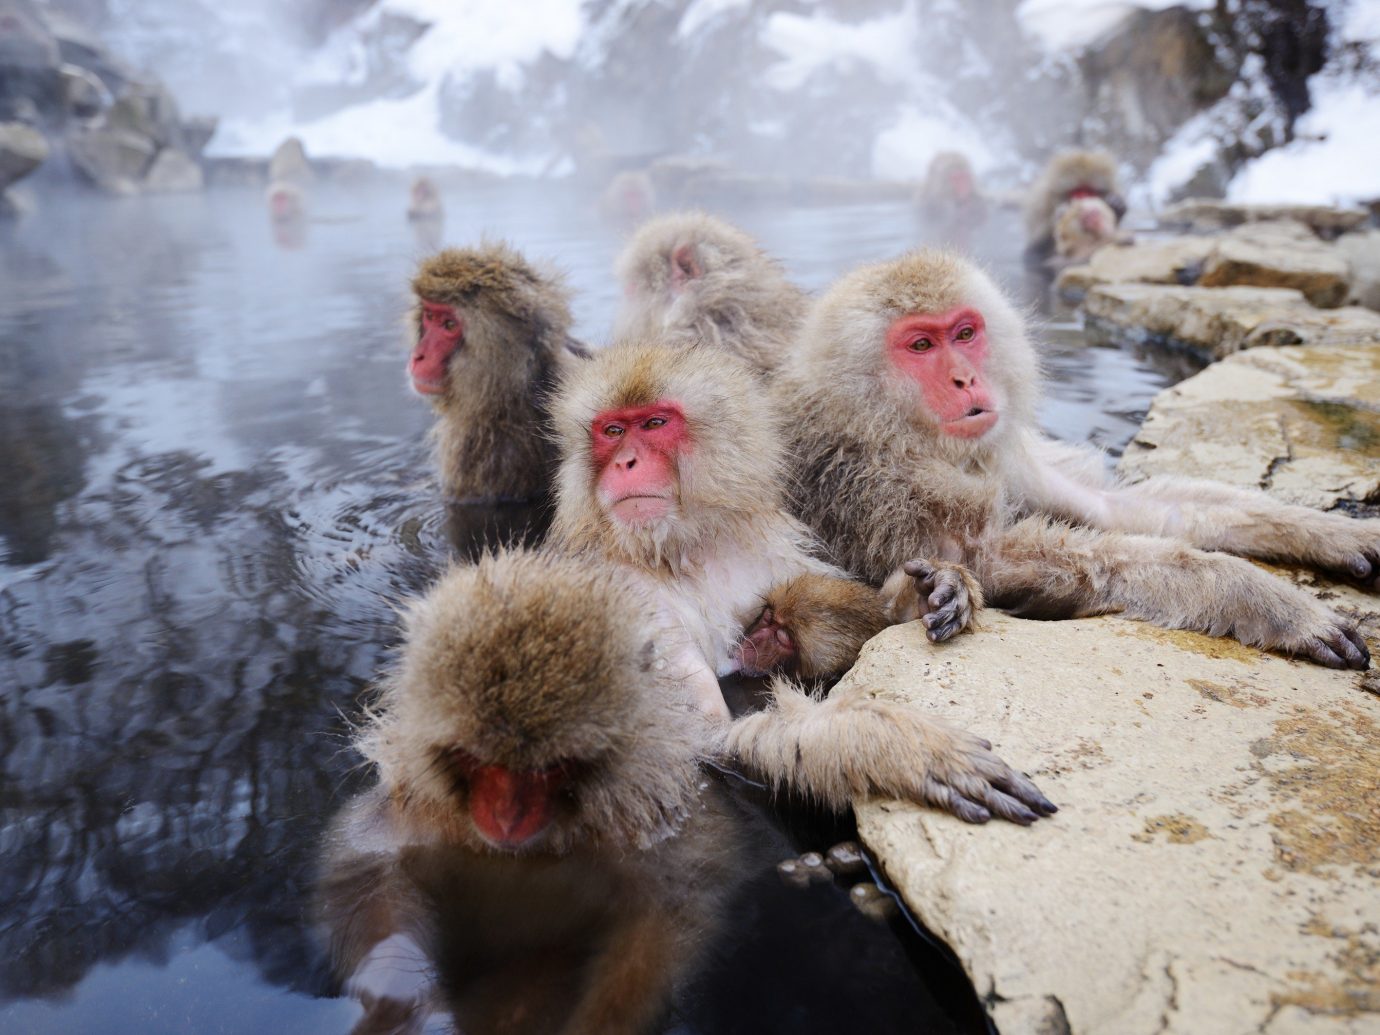 Adventure snow macaque outdoor primate japanese macaque old world monkey mammal monkey pile